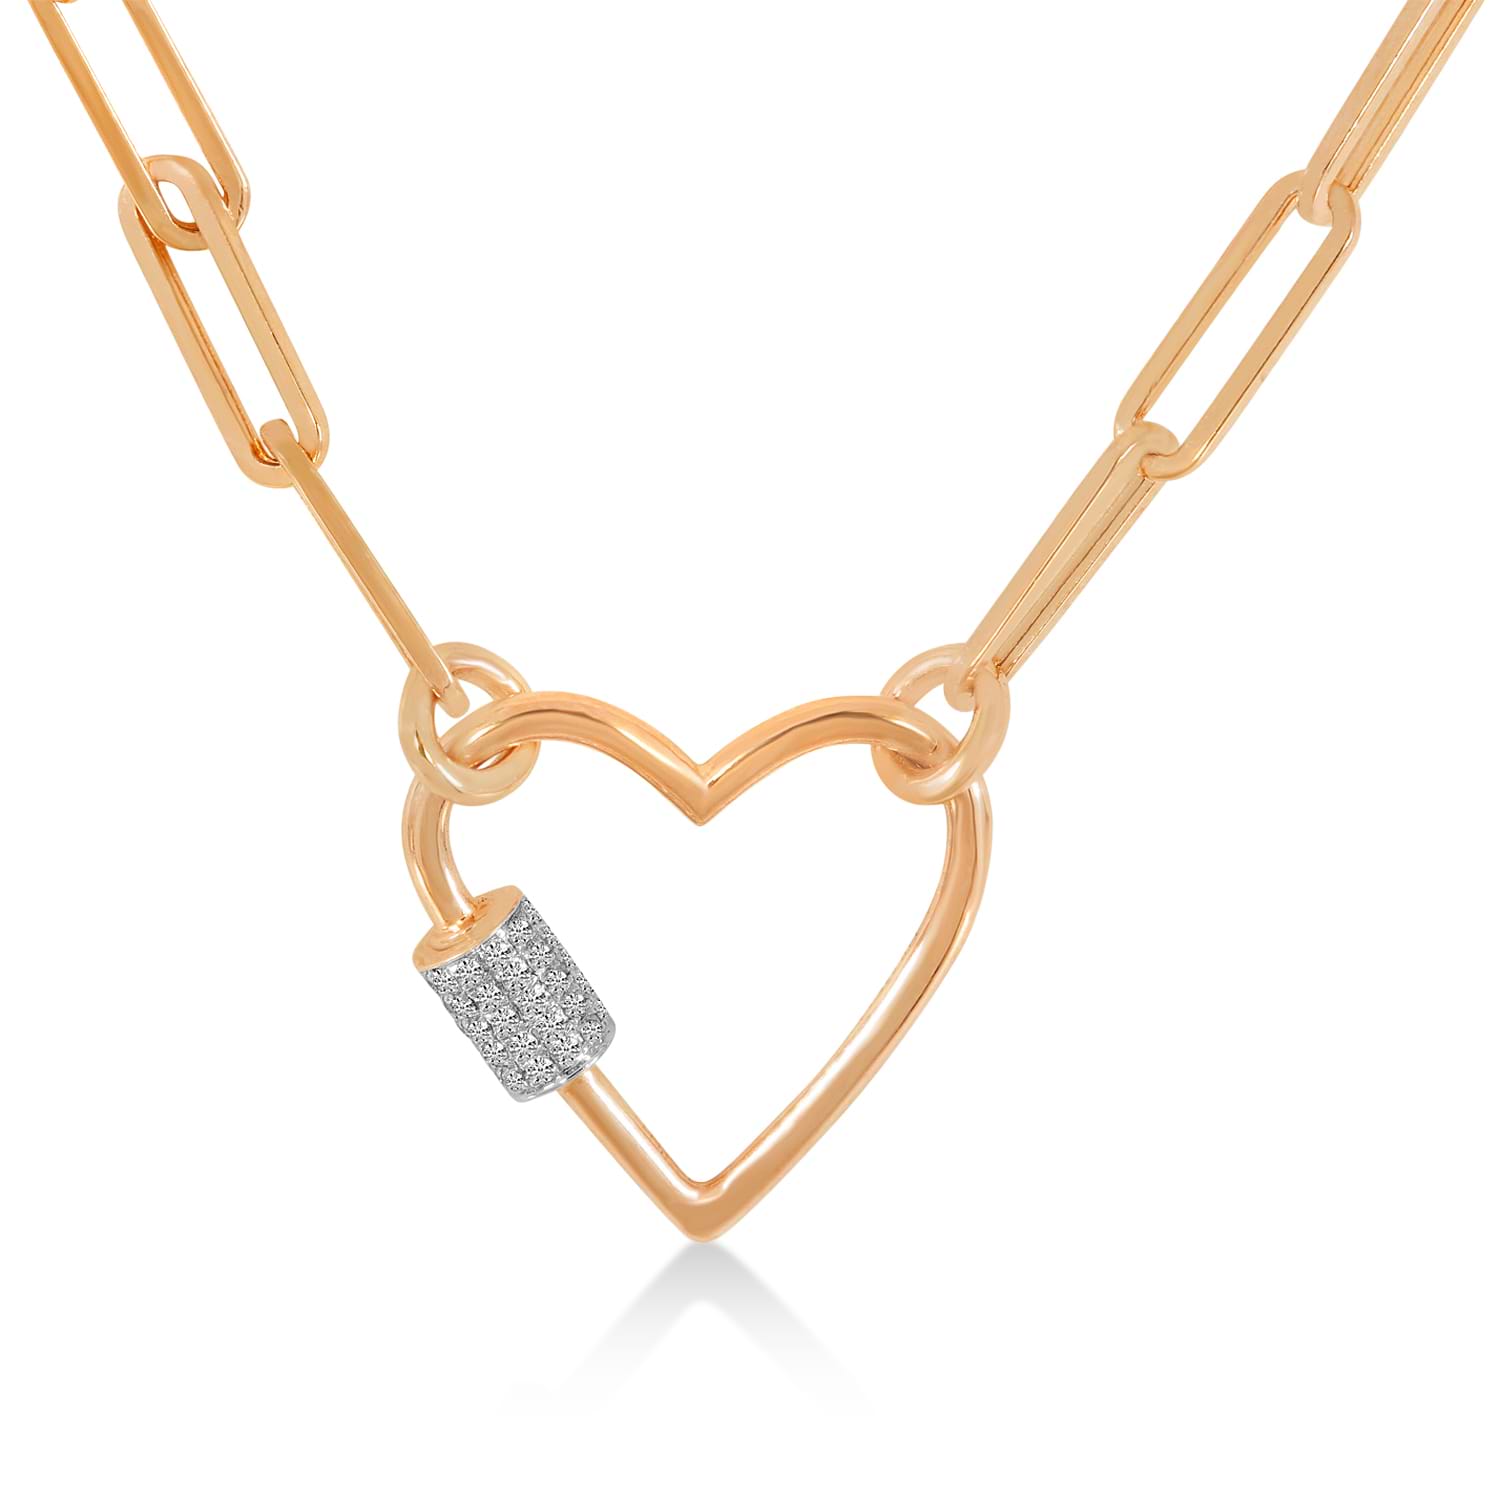 Diamond Paperclip Chain Heart Carabiner Pendant Necklace 14k Rose Gold (0.22ct)